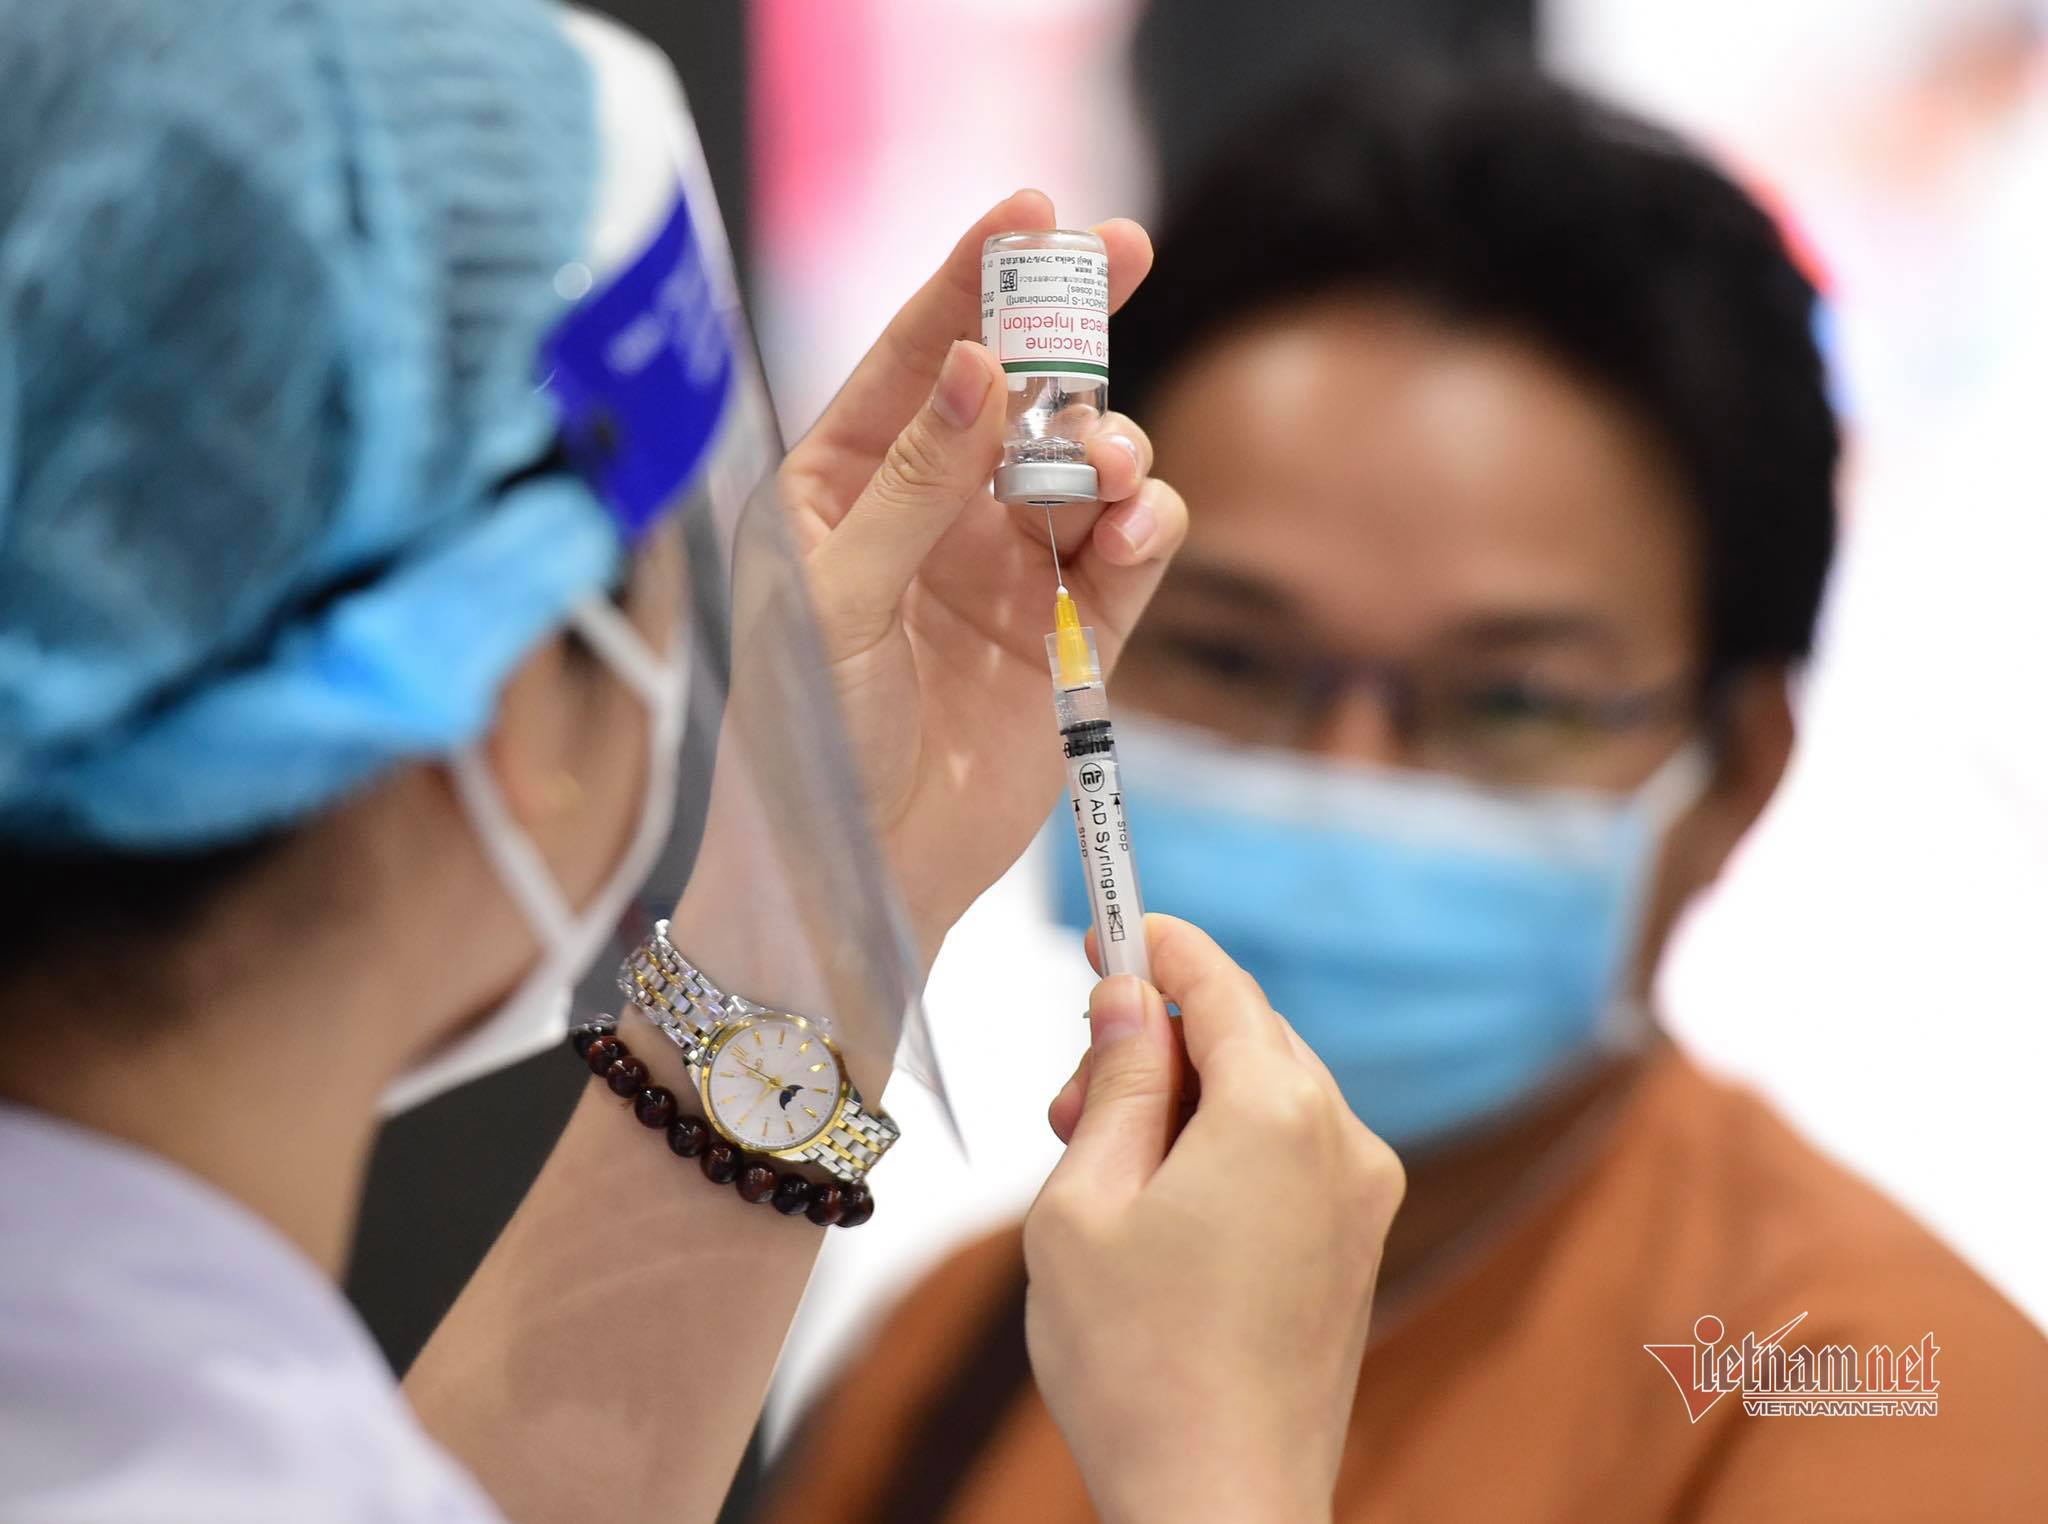 HCM City uses technology to speed up Covid-19 vaccination drive